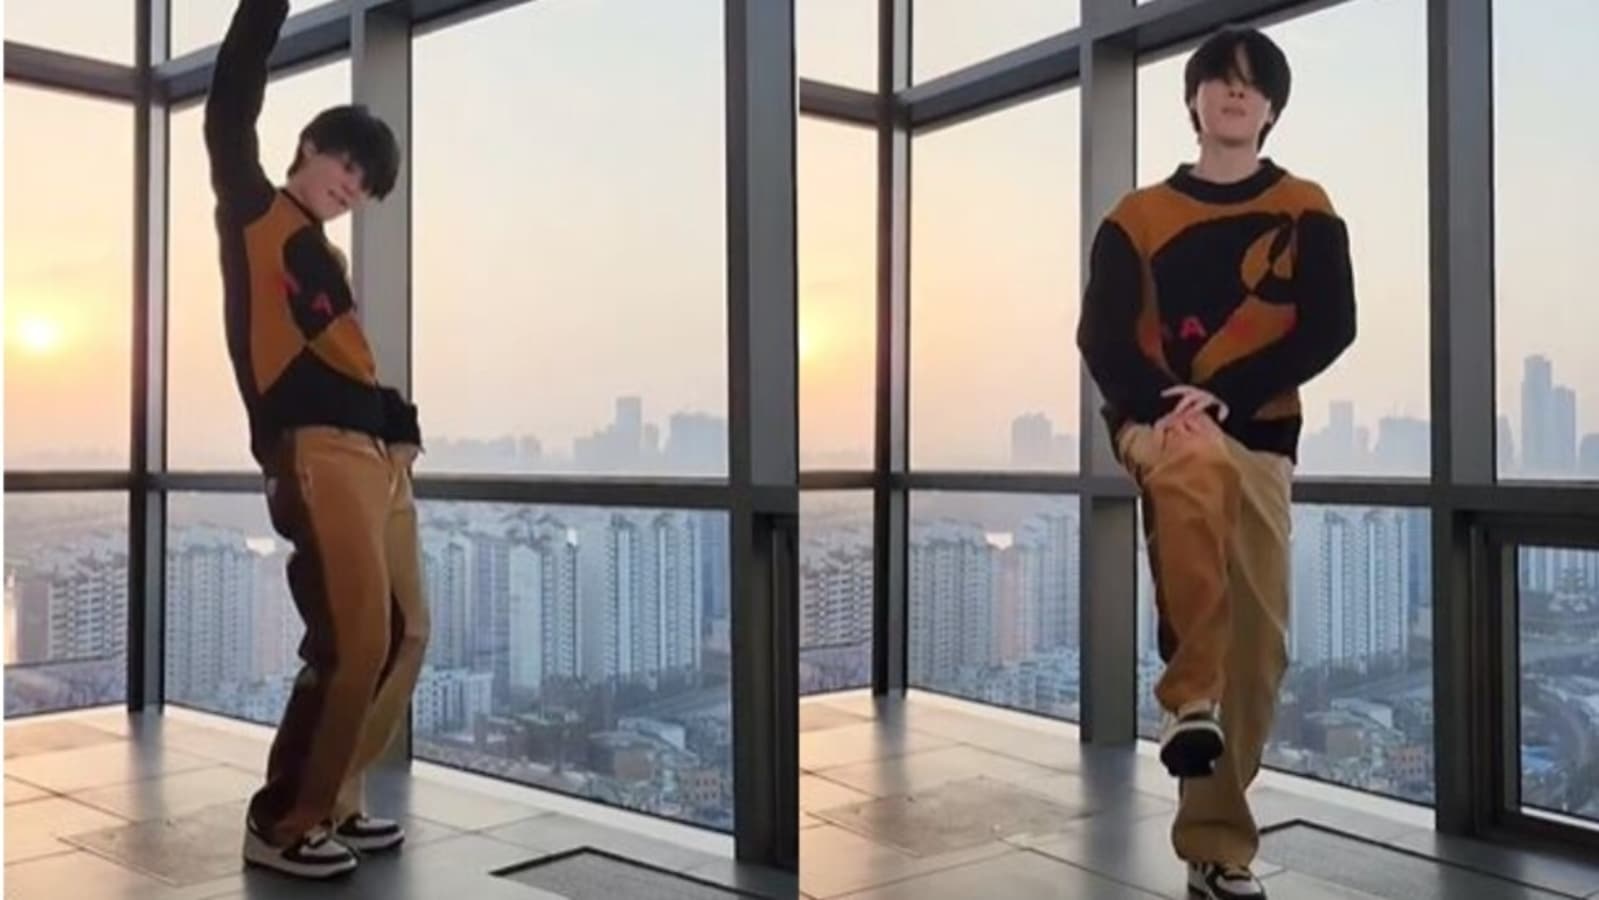 Jimin dances to medley of old BTS songs, leaves fans nostalgic: ‘I think we need more like this’. Watch